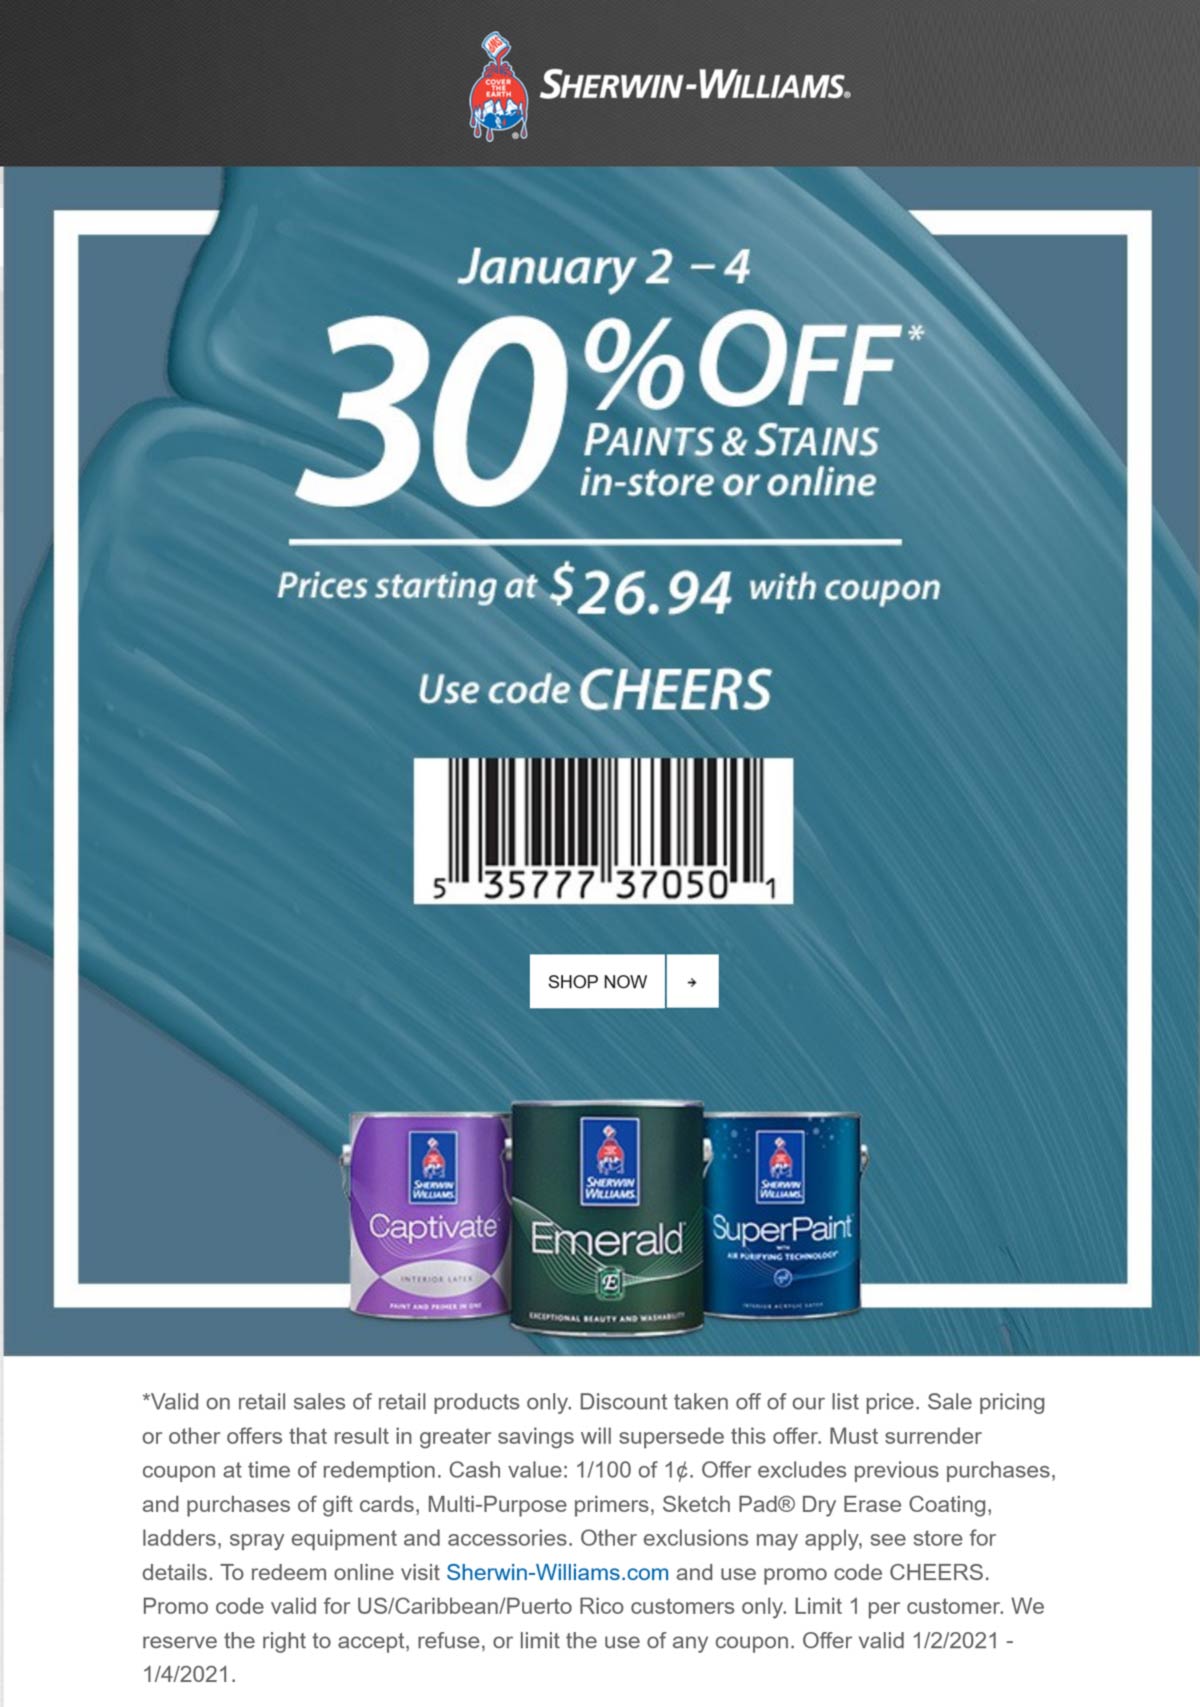 August 2021 30 Off Paints Stains At Sherwin Williams Or Online Via Promo Code Cheers Sherwinwilliams Coupon Promo Code The Coupons App